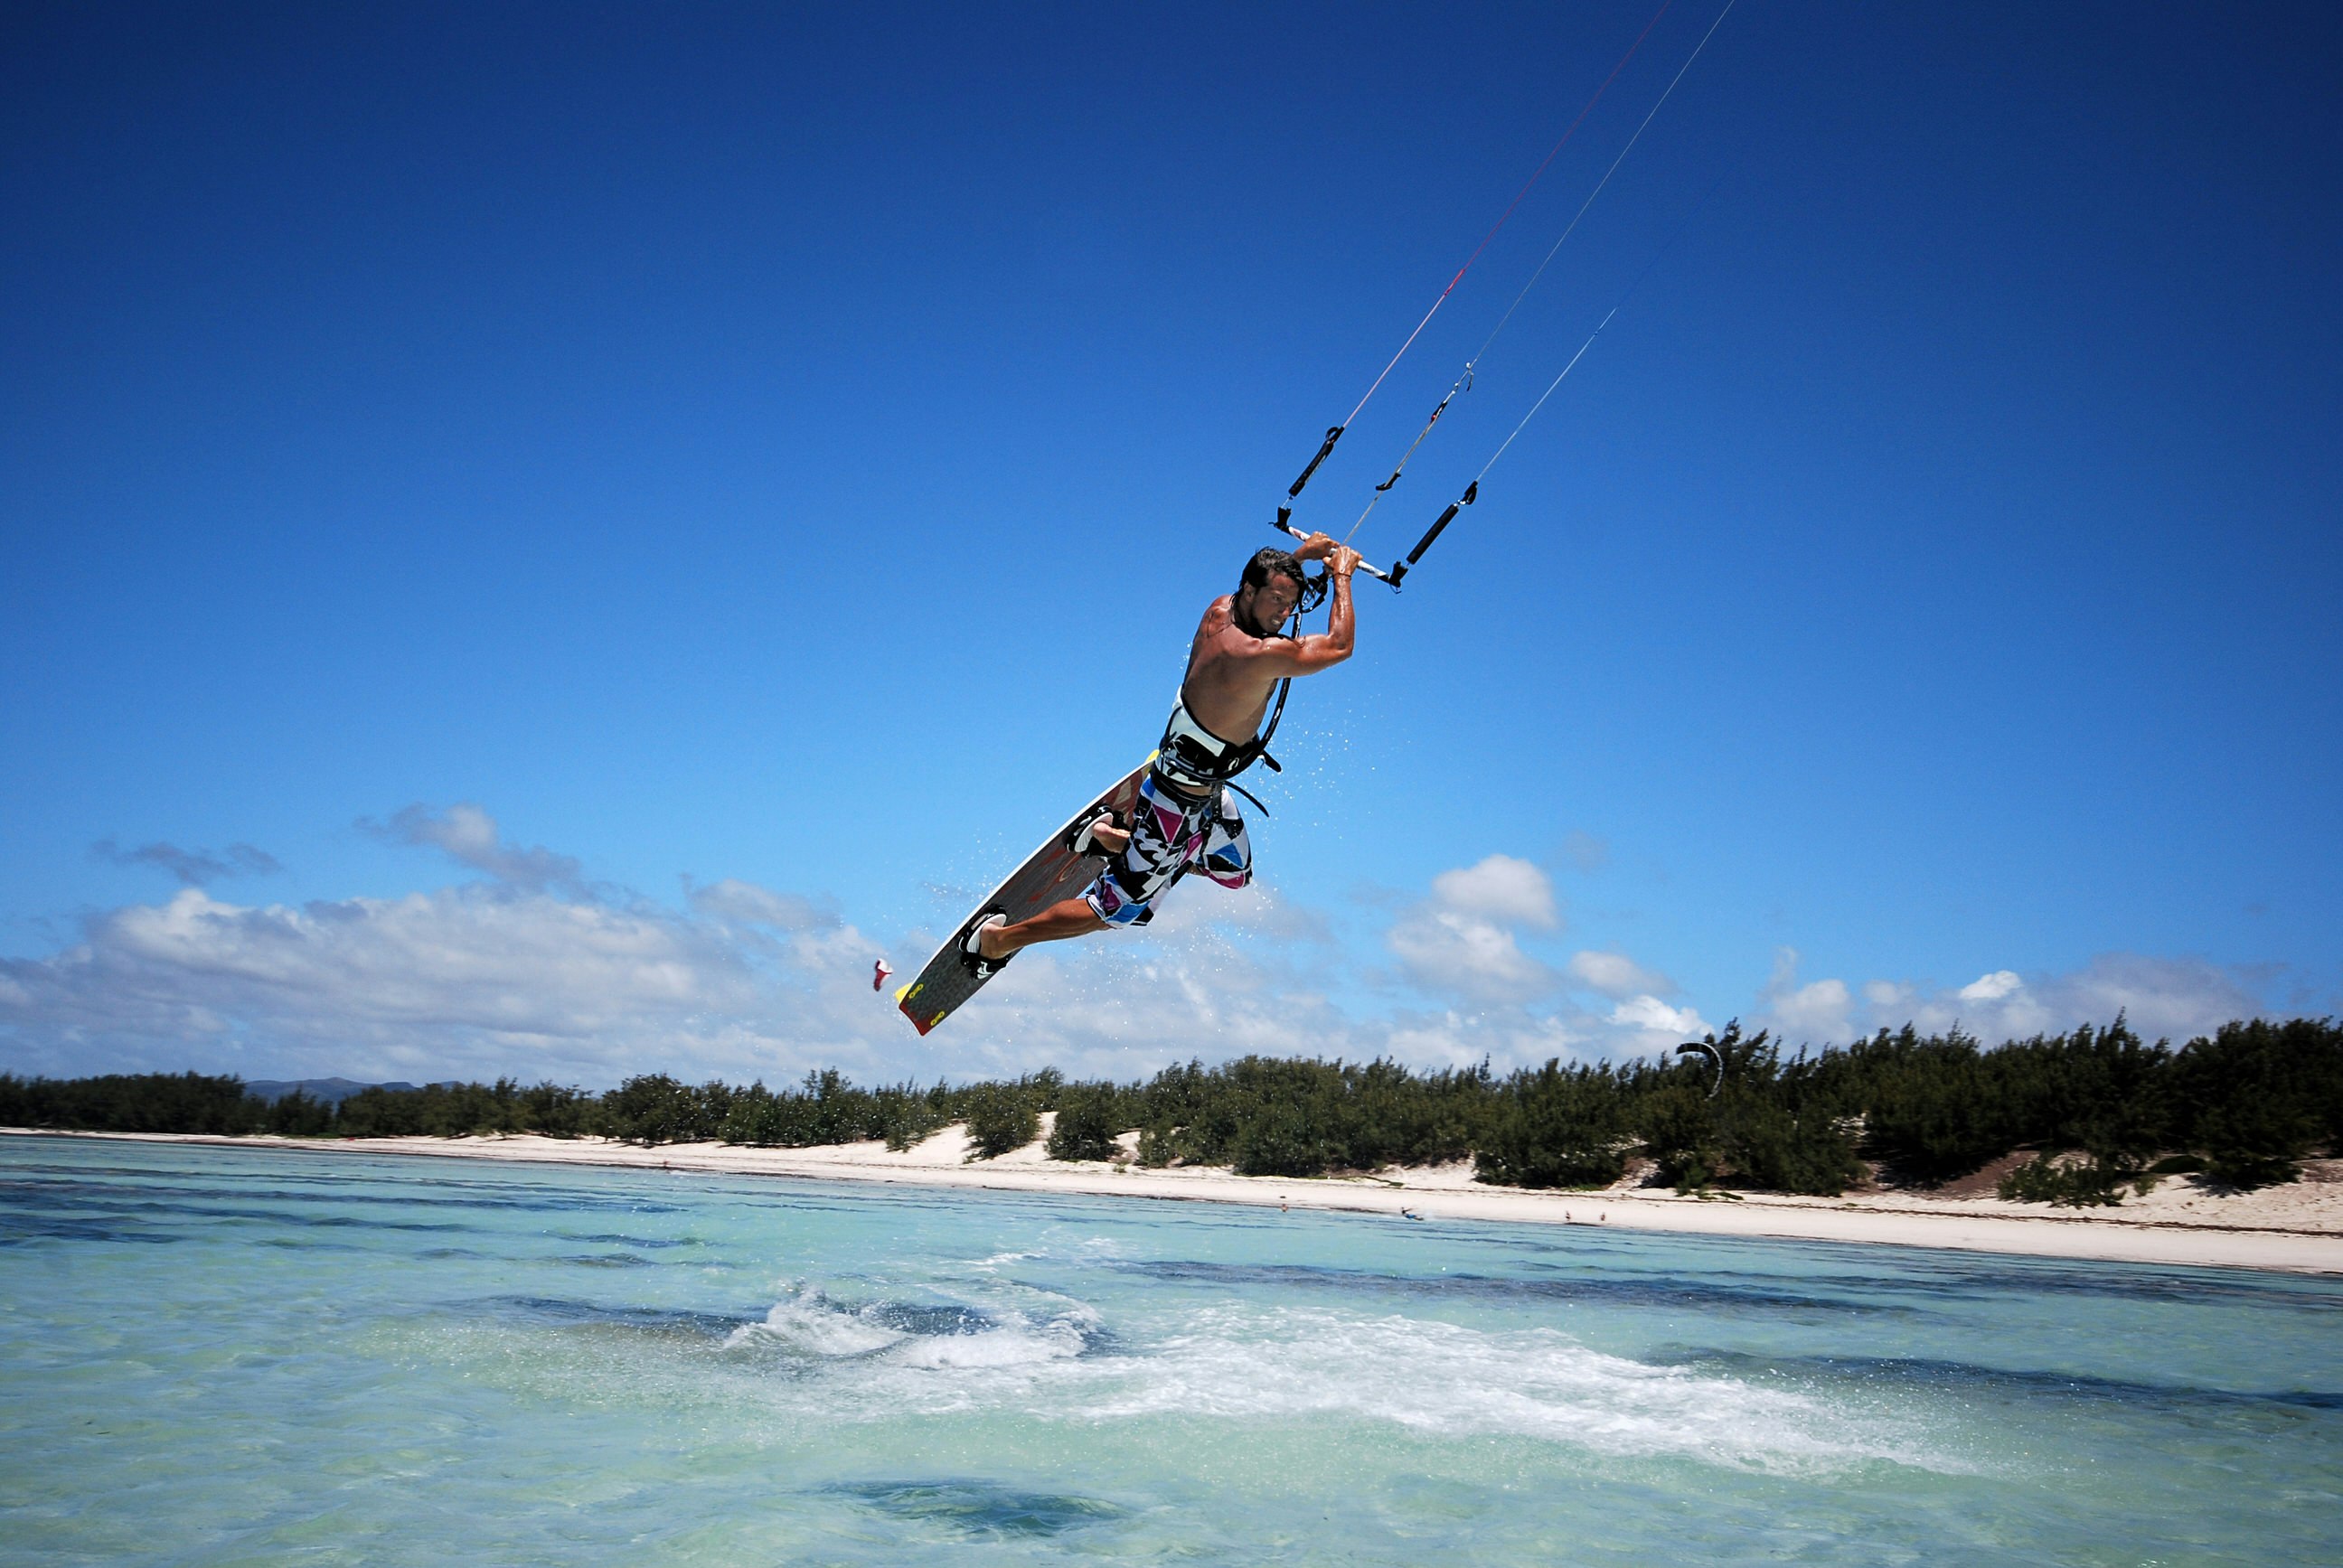 A kitesurfer sails through the air, his kite above him and out of the picture; below him is tropical waters, with a distance beach and forest in the background.